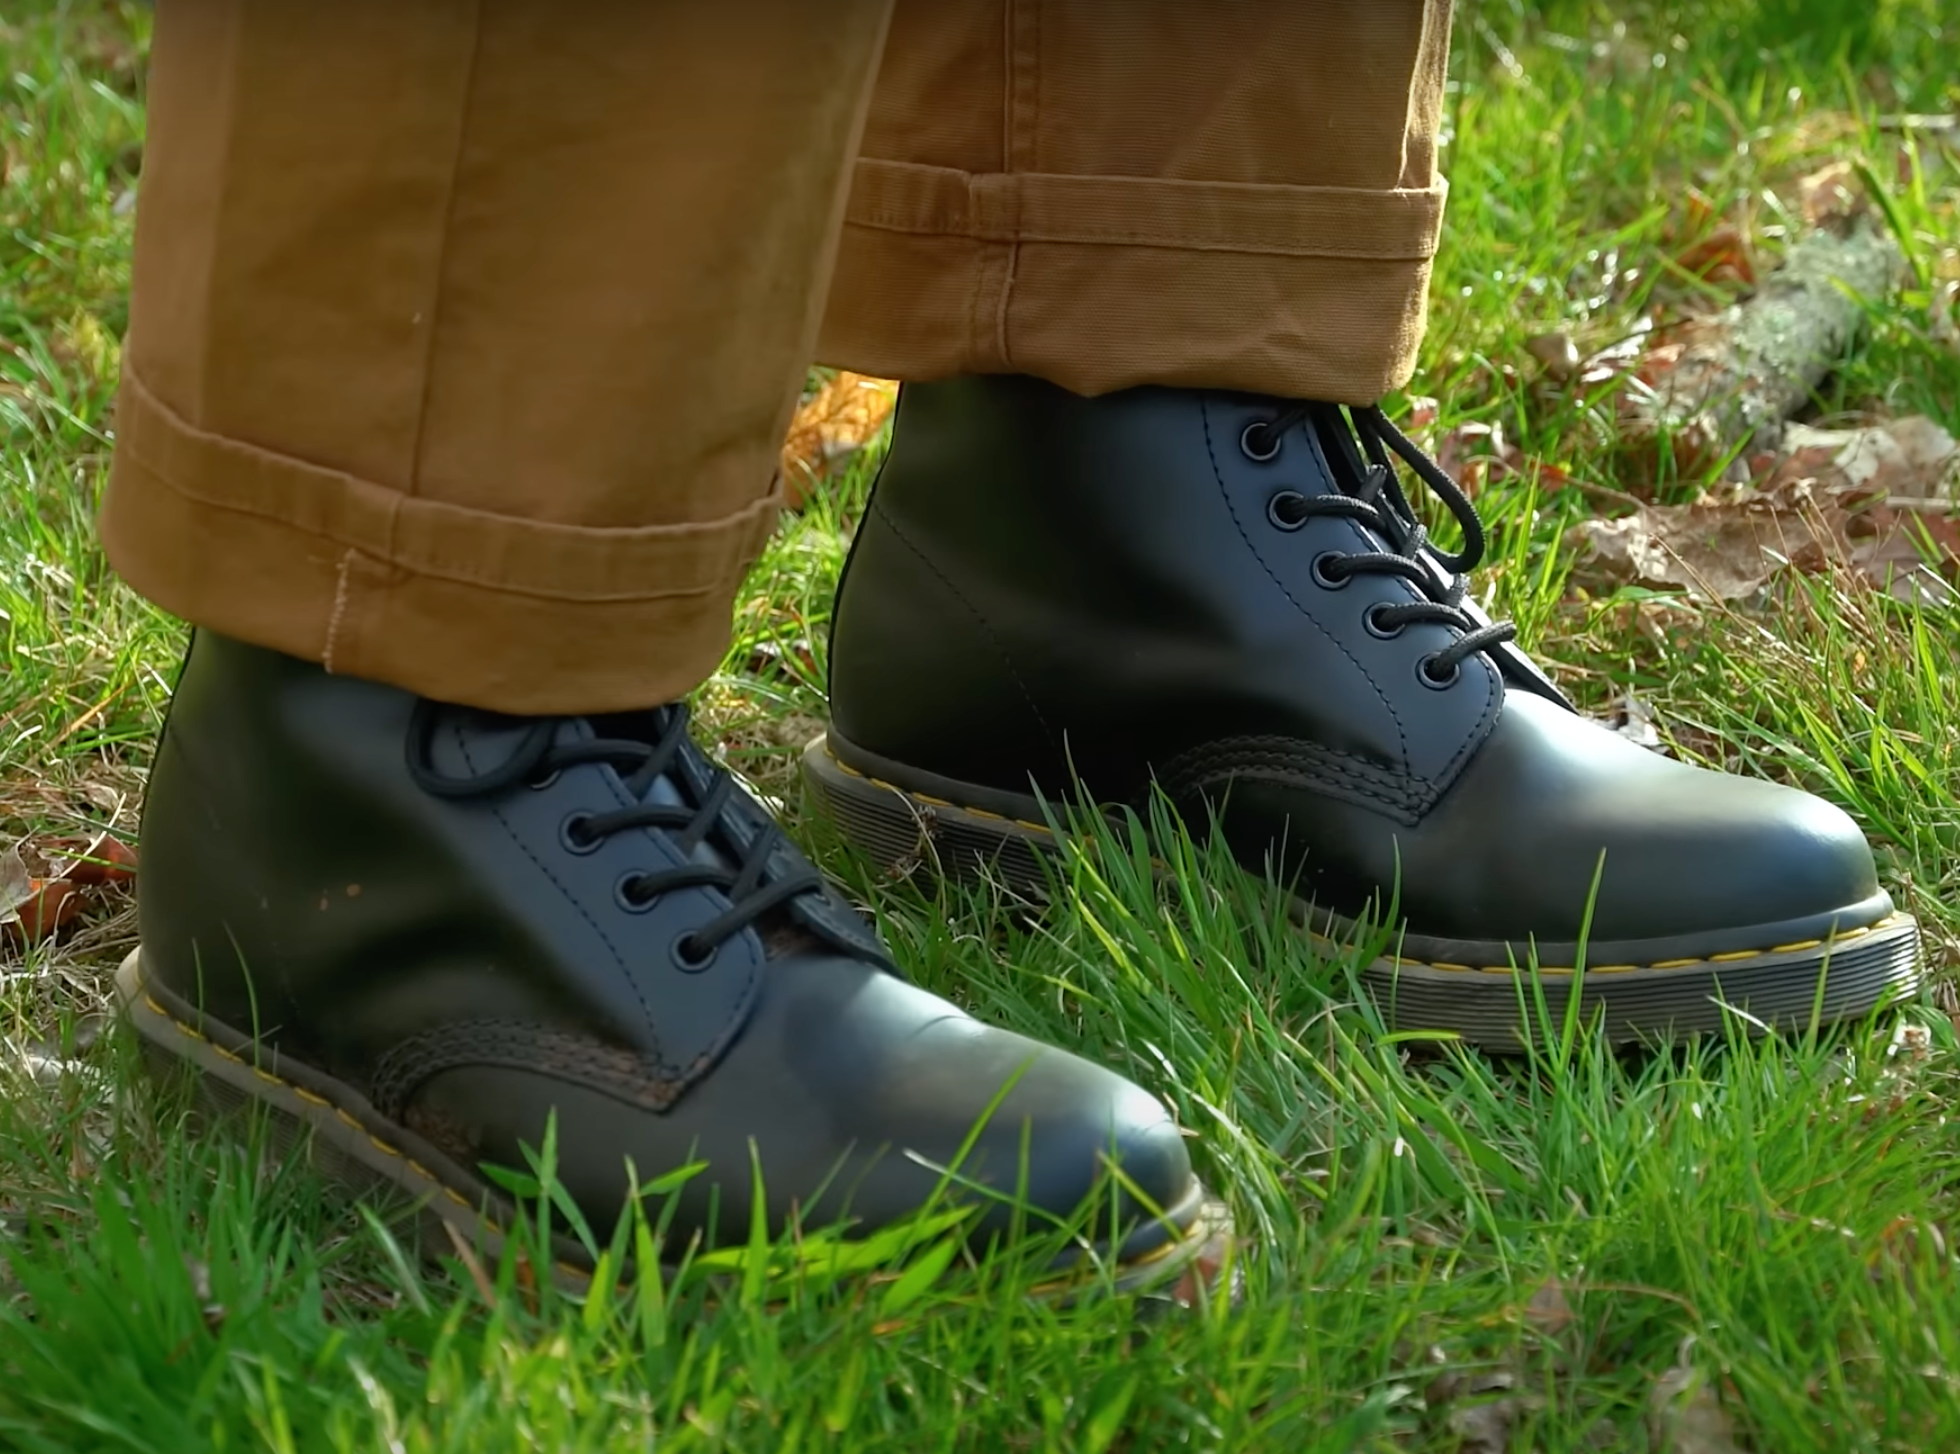 Dr. Martens 1460 Boots on someone's feet in the grass